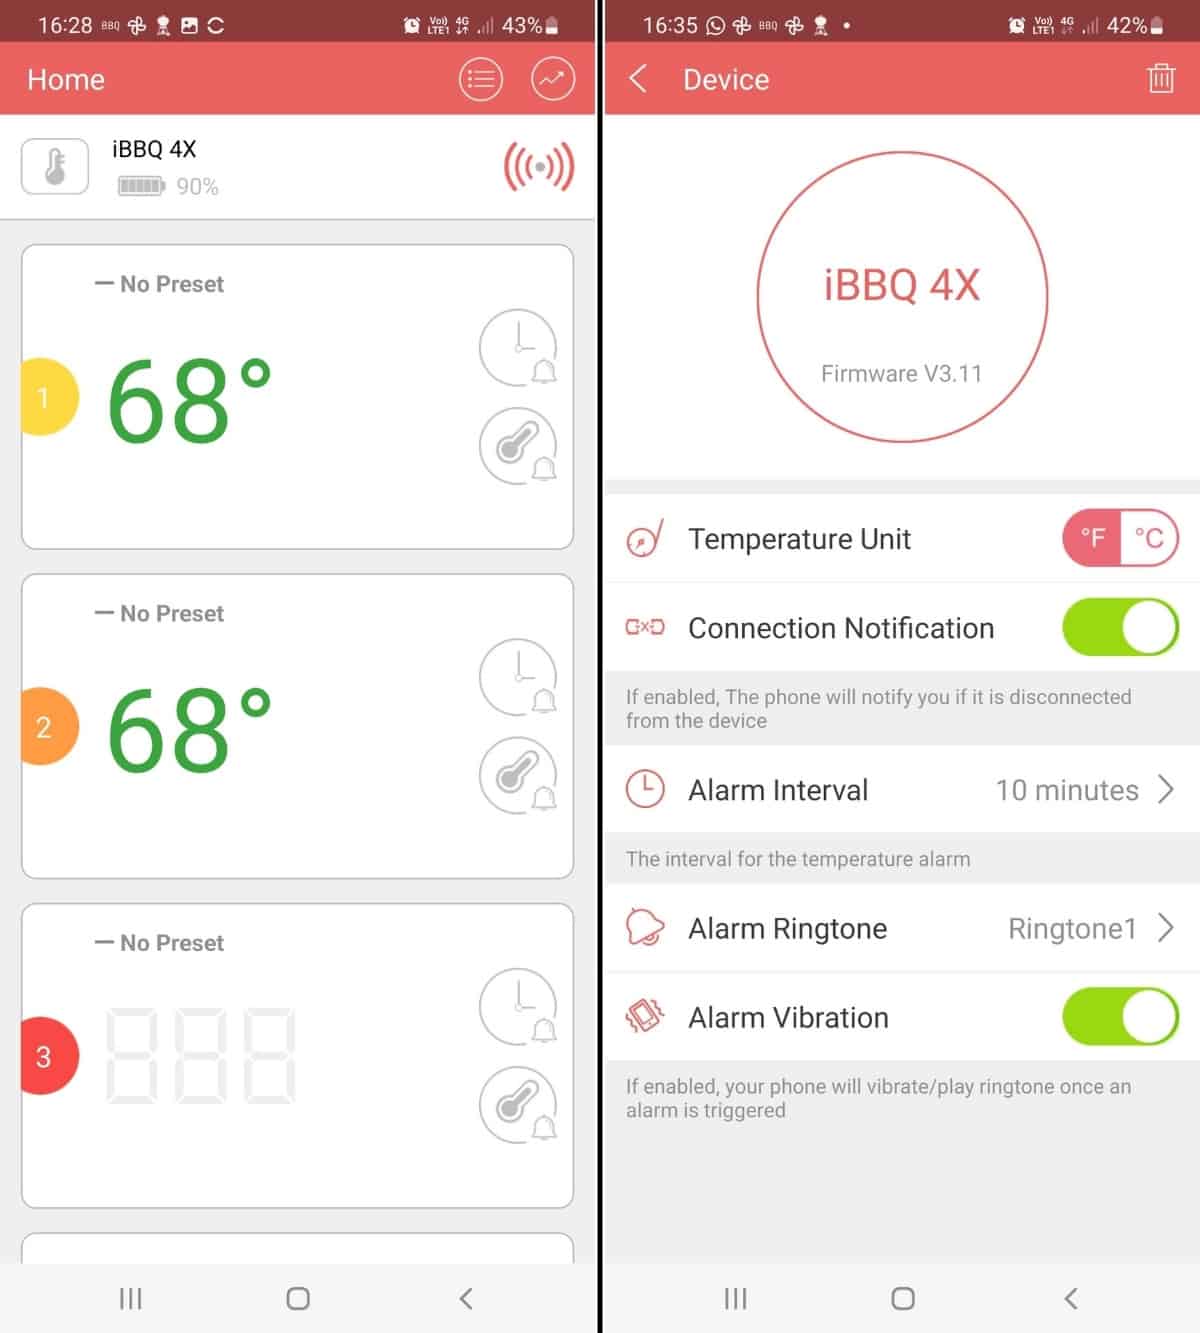 Inkbird smartphone app screenshots showing two probes temperatures at 68 degrees, and the settings screen